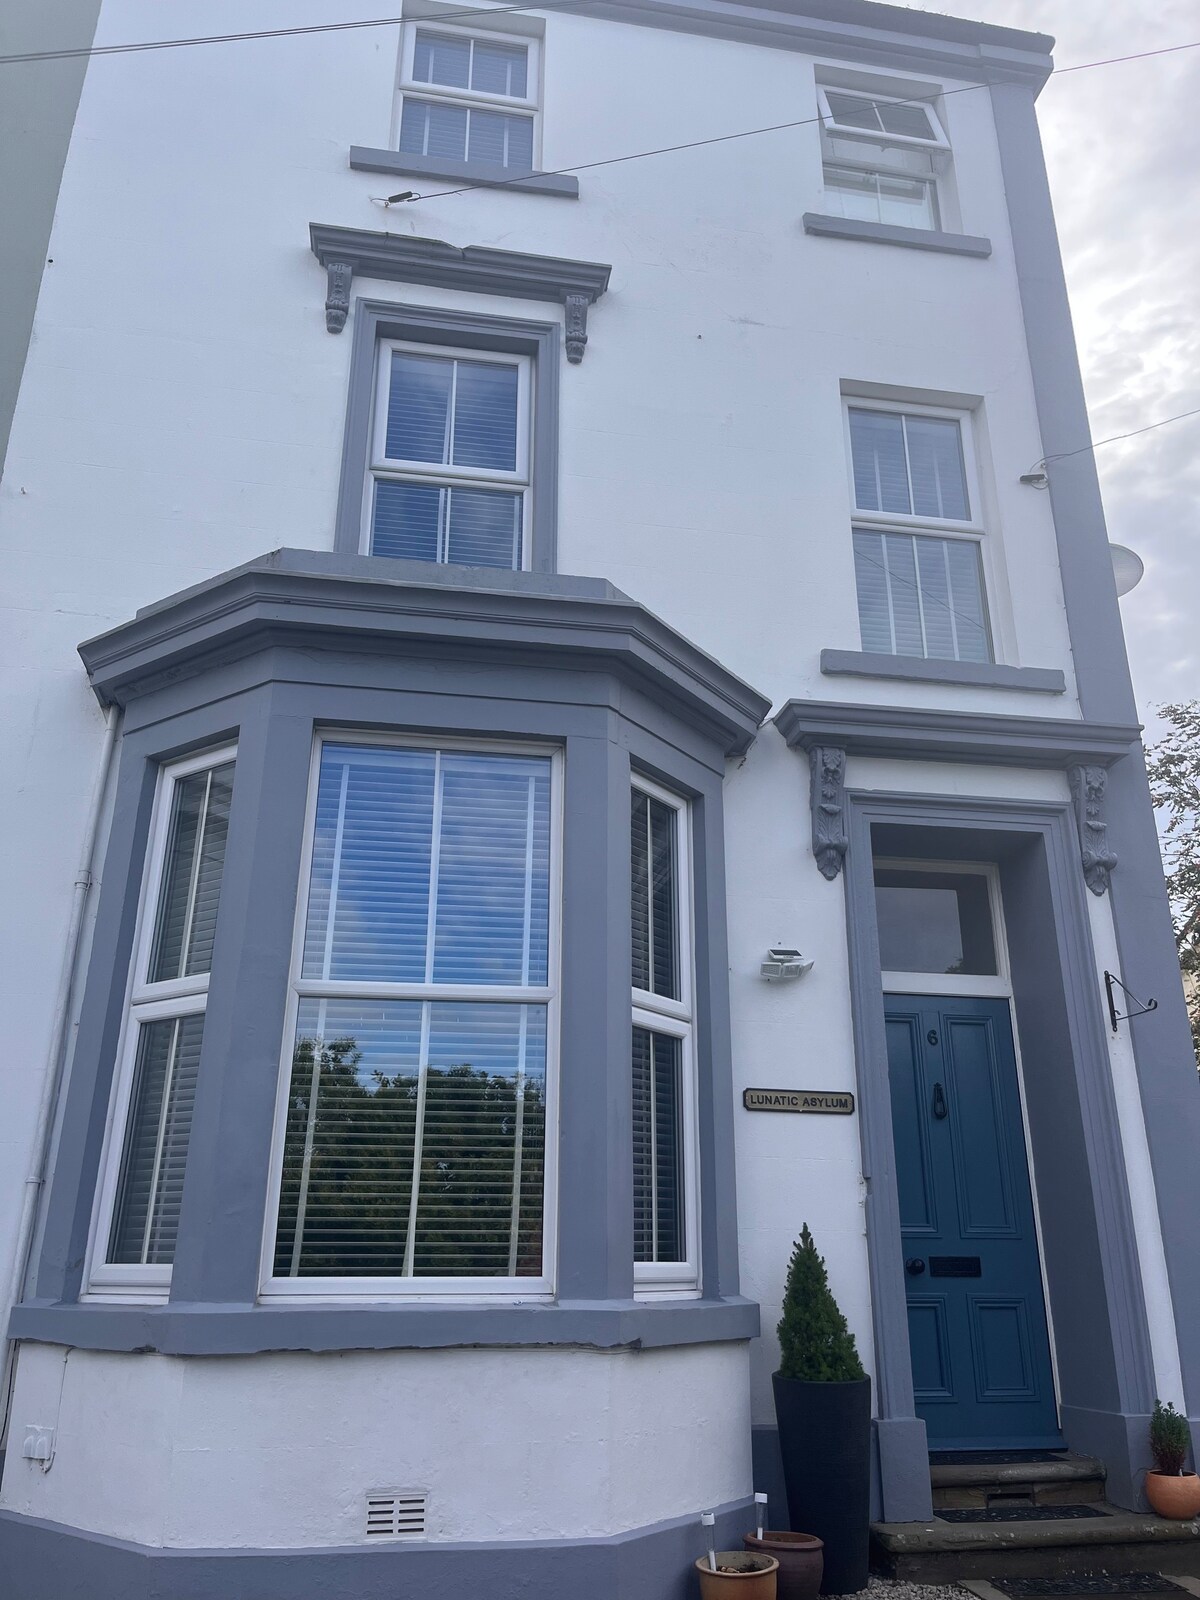 5 bedroomed Victorian House